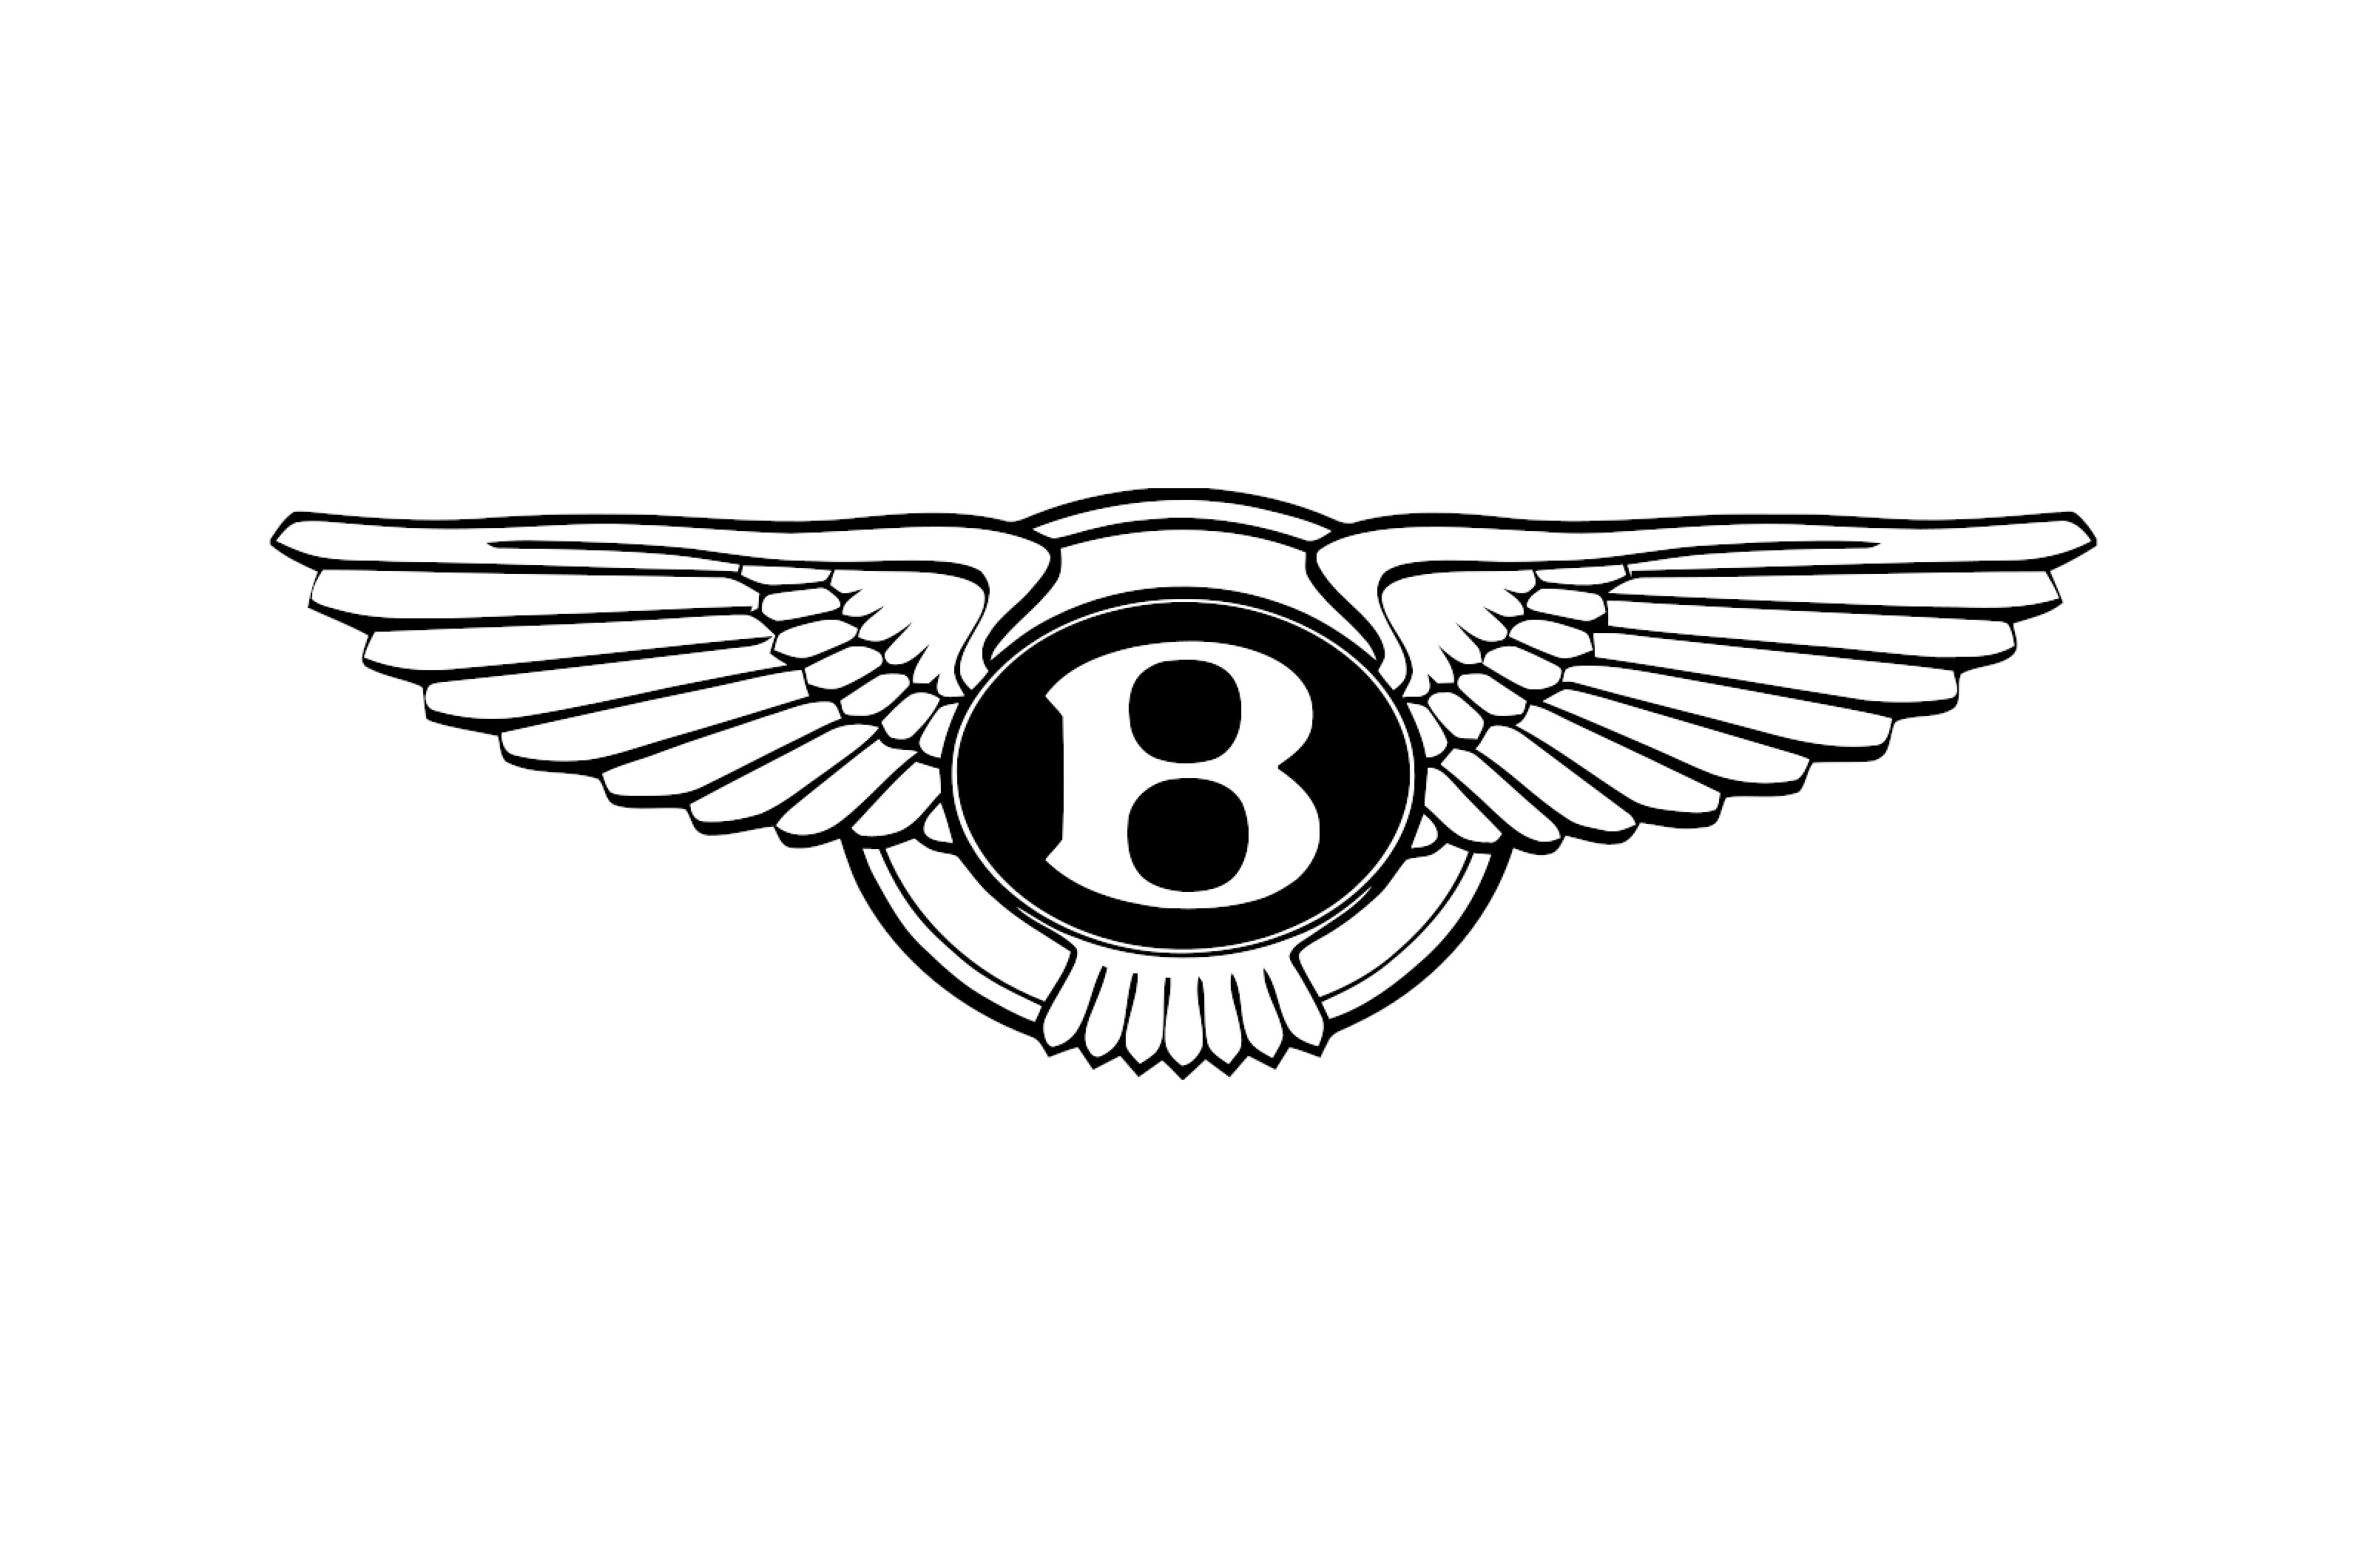 <p>Bentley’s logo has been updated only slightly since the company was founded in 1919.</p>  <p>It consists of a letter B in a central circle, which is surrounded by two wings.</p>  <p>The left wing has always had one feather fewer than the right, a feature originally intended to make badges crafted by villainous but inattentive forgers easier to spot.</p>  <p>Bentley mascots have used the B (not in a circle this time) mounted fore-and-aft, and wings which at one point sprouted out to either side but more usually – and more aerodynamically – extend backwards along the center line of the car.</p>